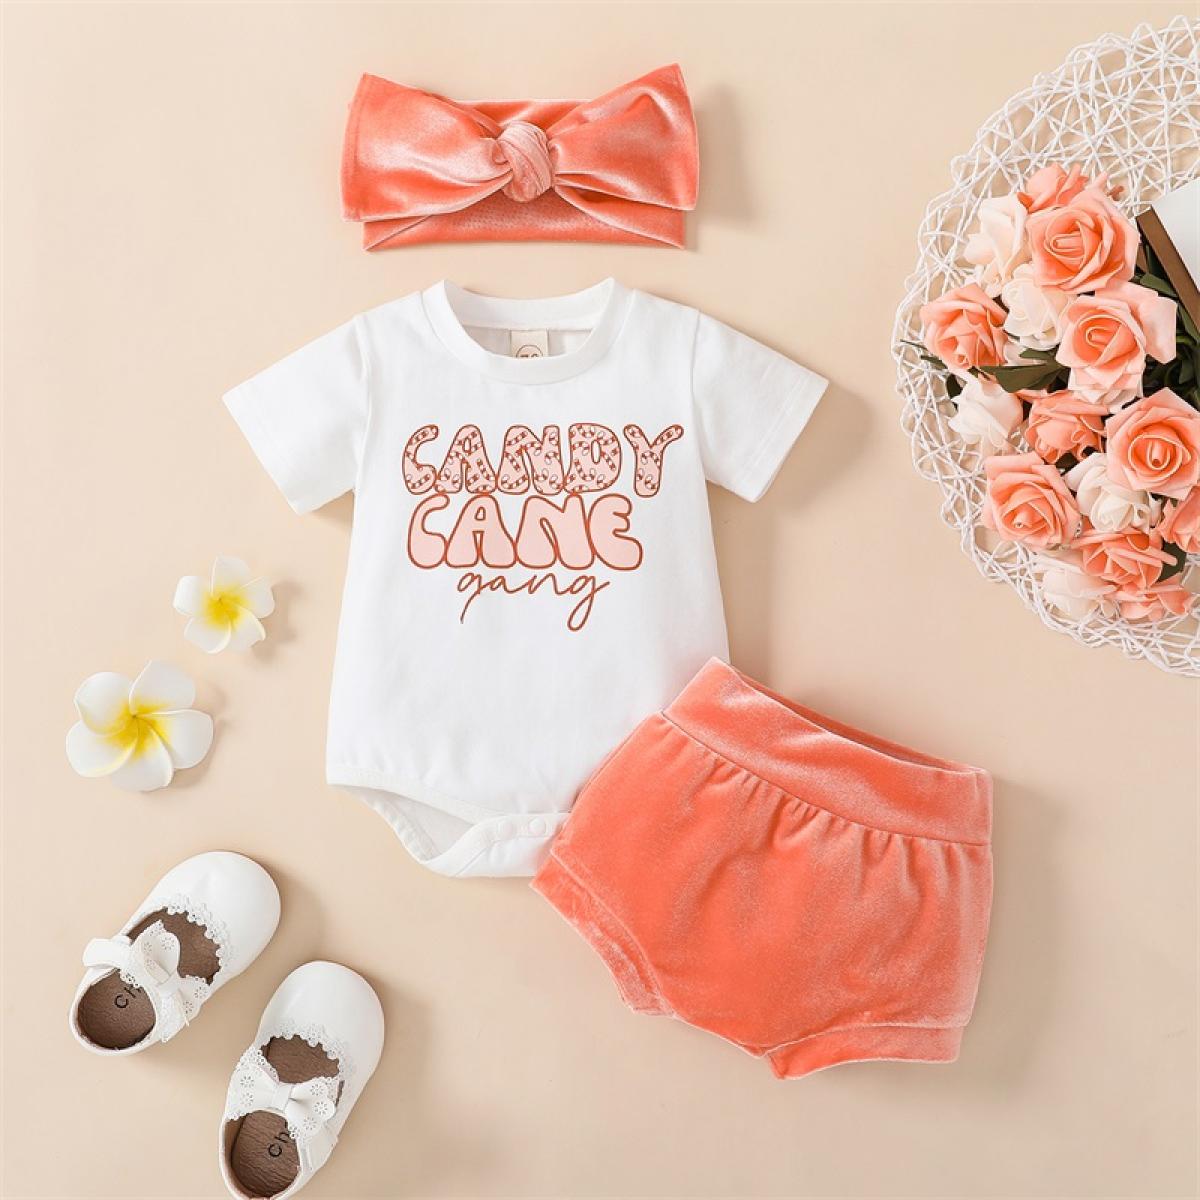 Sunsiom Kid Girl Clothes Suit Short Sleeve Round Neck Letters